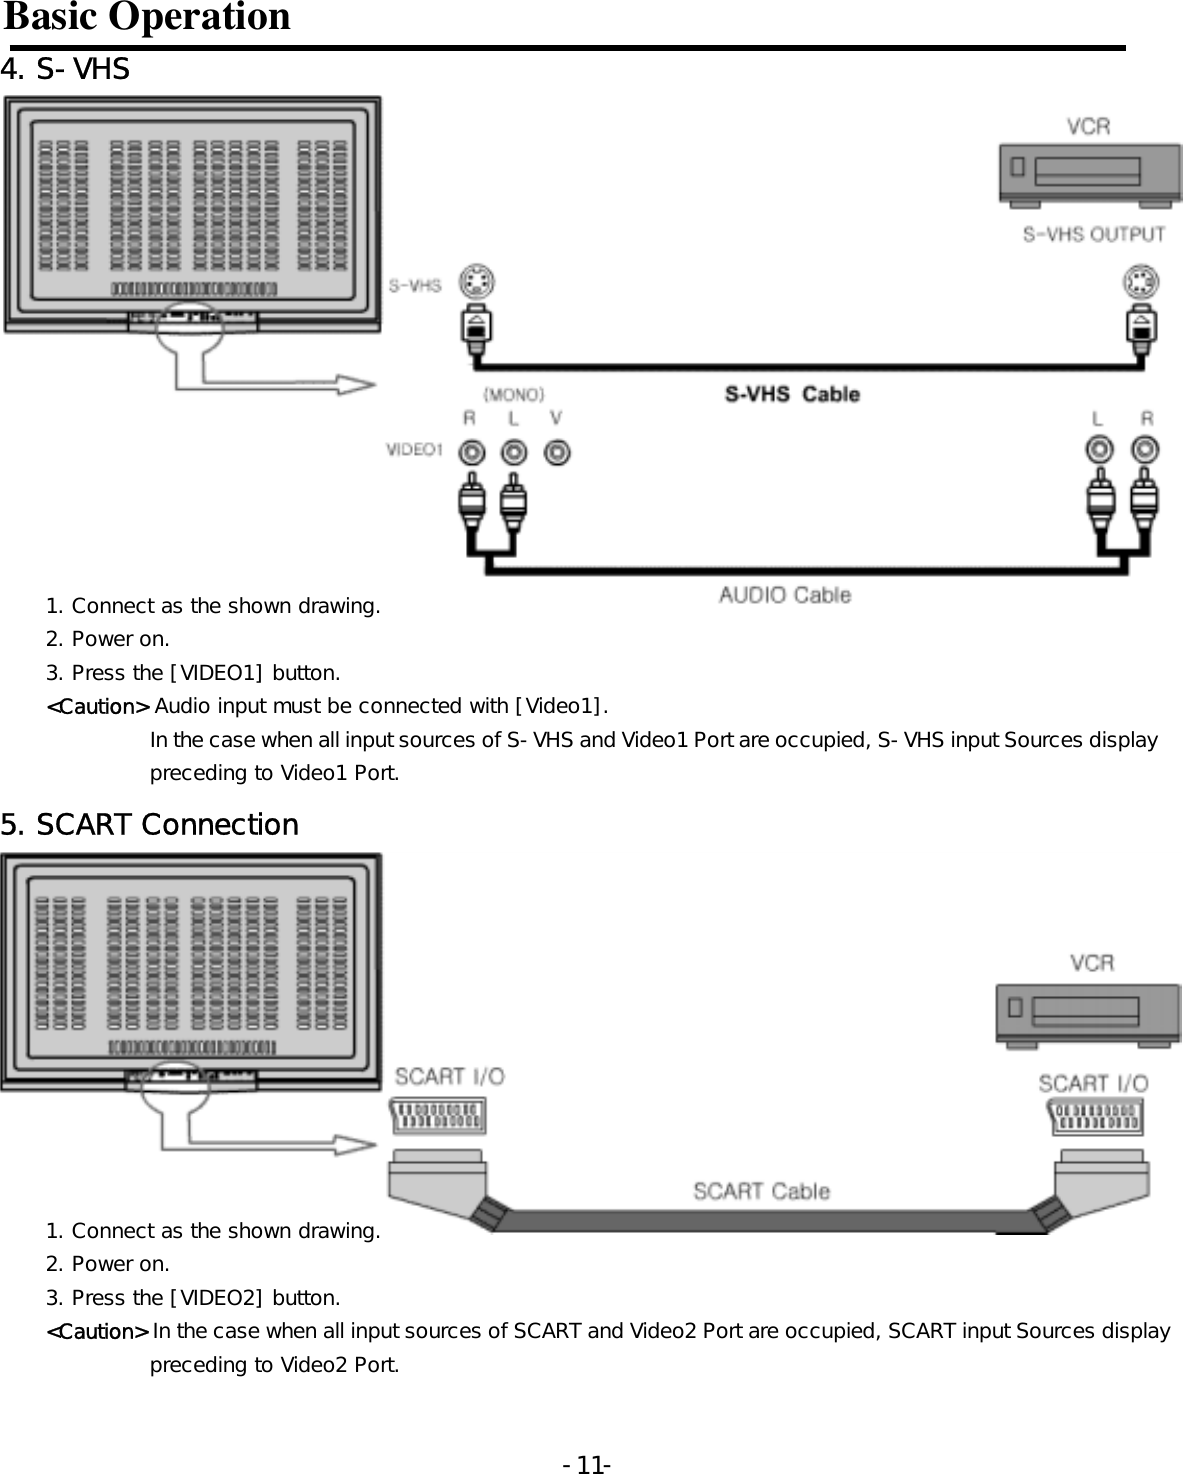 Basic Operation 4. S-VHS   1. Connect as the shown drawing. 2. Power on. 3. Press the [VIDEO1] button. &lt;Caution&gt; Audio input must be connected with [Video1].           In the case when all input sources of S-VHS and Video1 Port are occupied, S-VHS input Sources displaypreceding to Video1 Port.     5. SCART Connection  1. Connect as the shown drawing. 2. Power on. 3. Press the [VIDEO2] button. &lt;Caution&gt; In the case when all input sources of SCART and Video2 Port are occupied, SCART input Sources displaypreceding to Video2 Port.    -  - 11